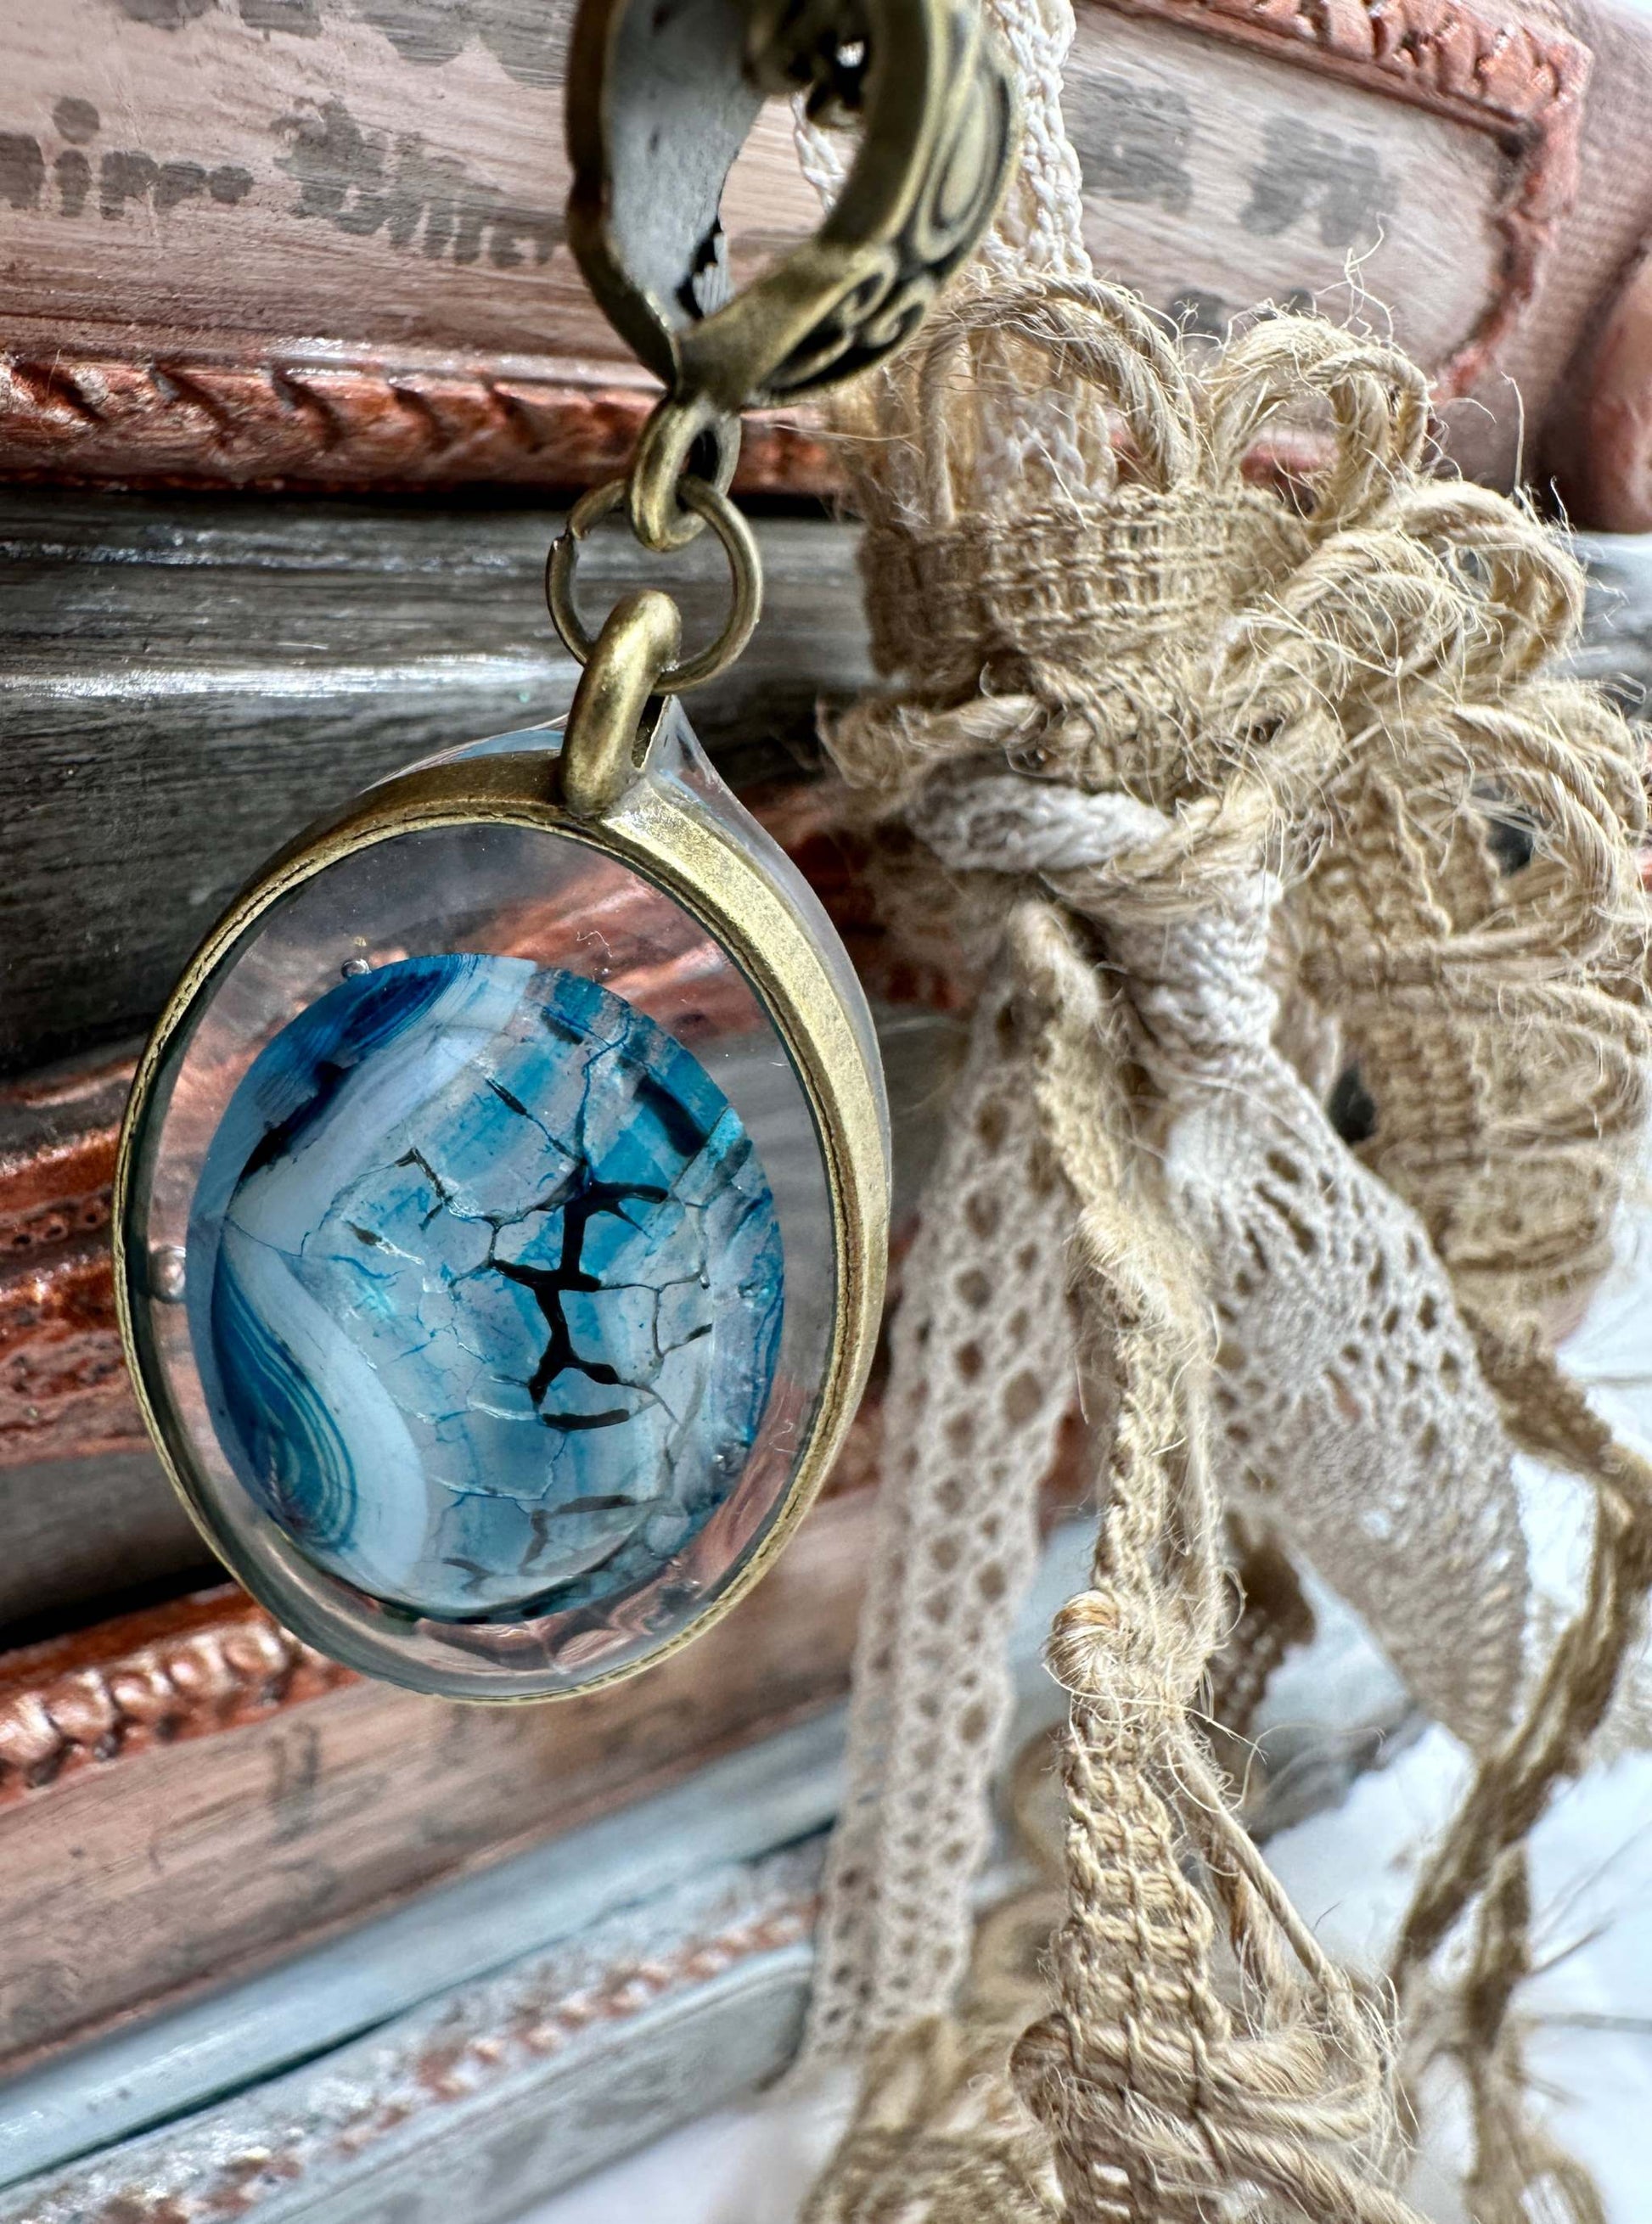 Gemstone Dragon Veins Necklace - Nature's Beauty Captured in a Pendant